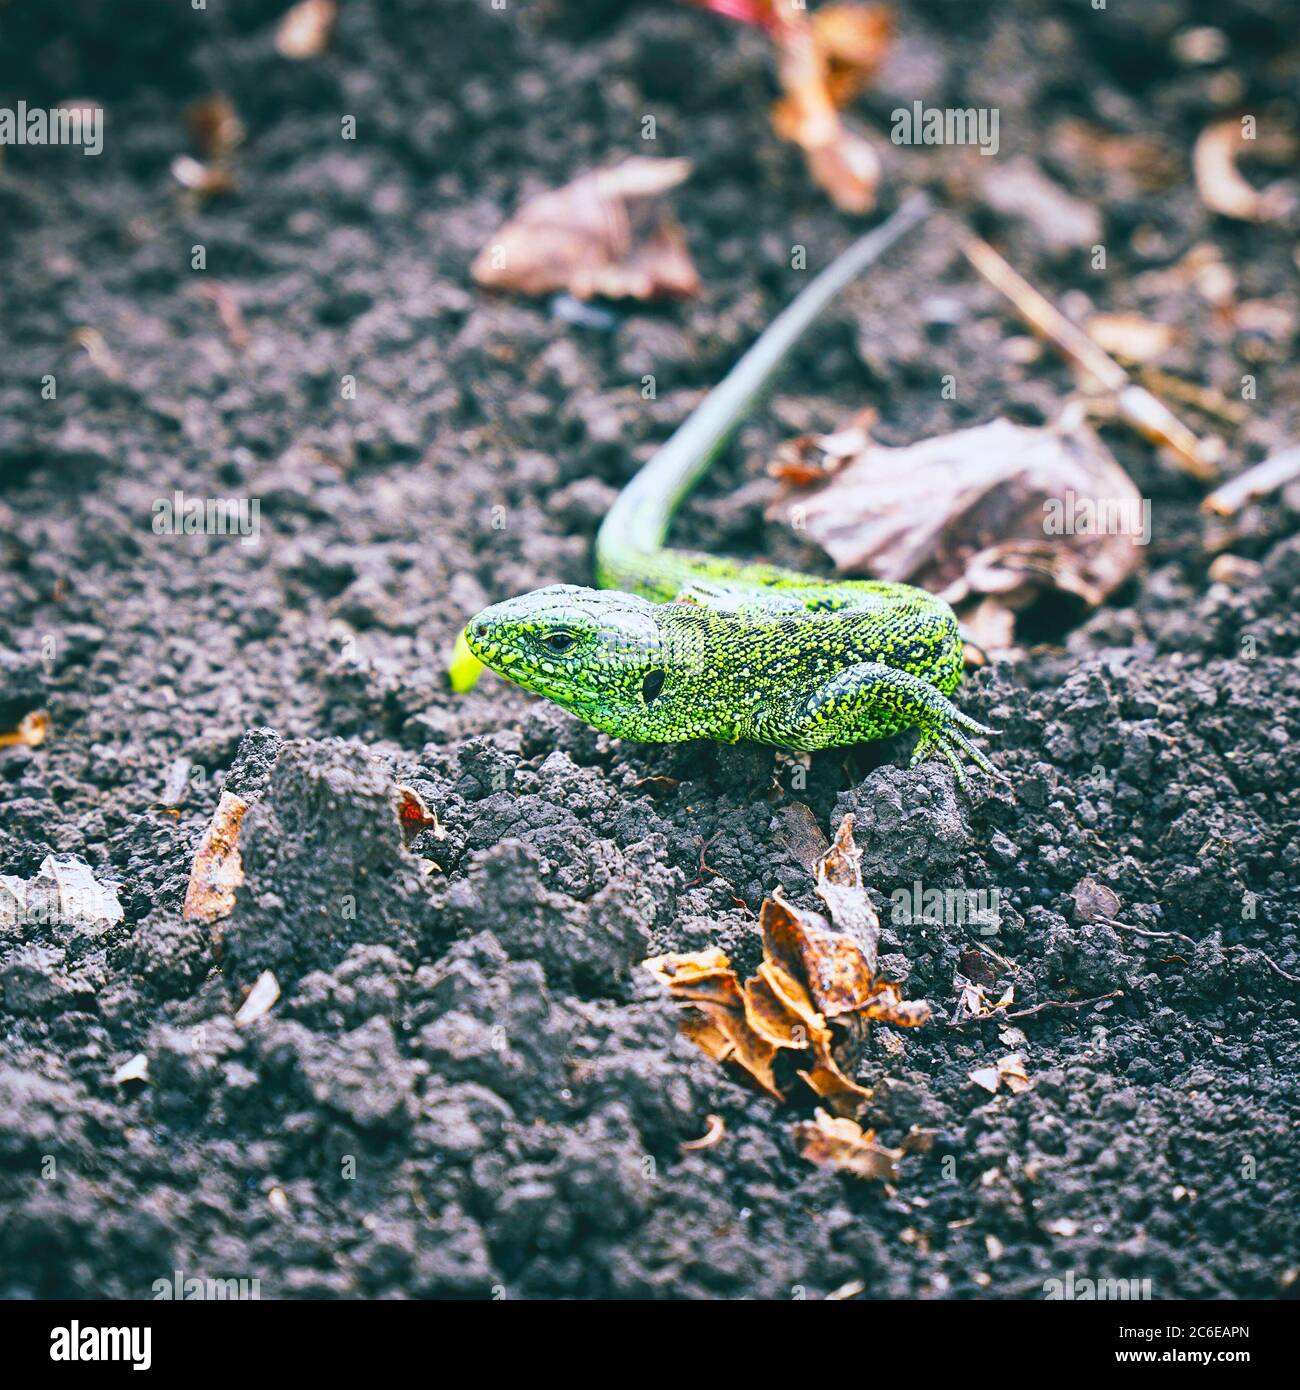 Portrait of a Small green lizard on the ground. Selective focus Stock Photo